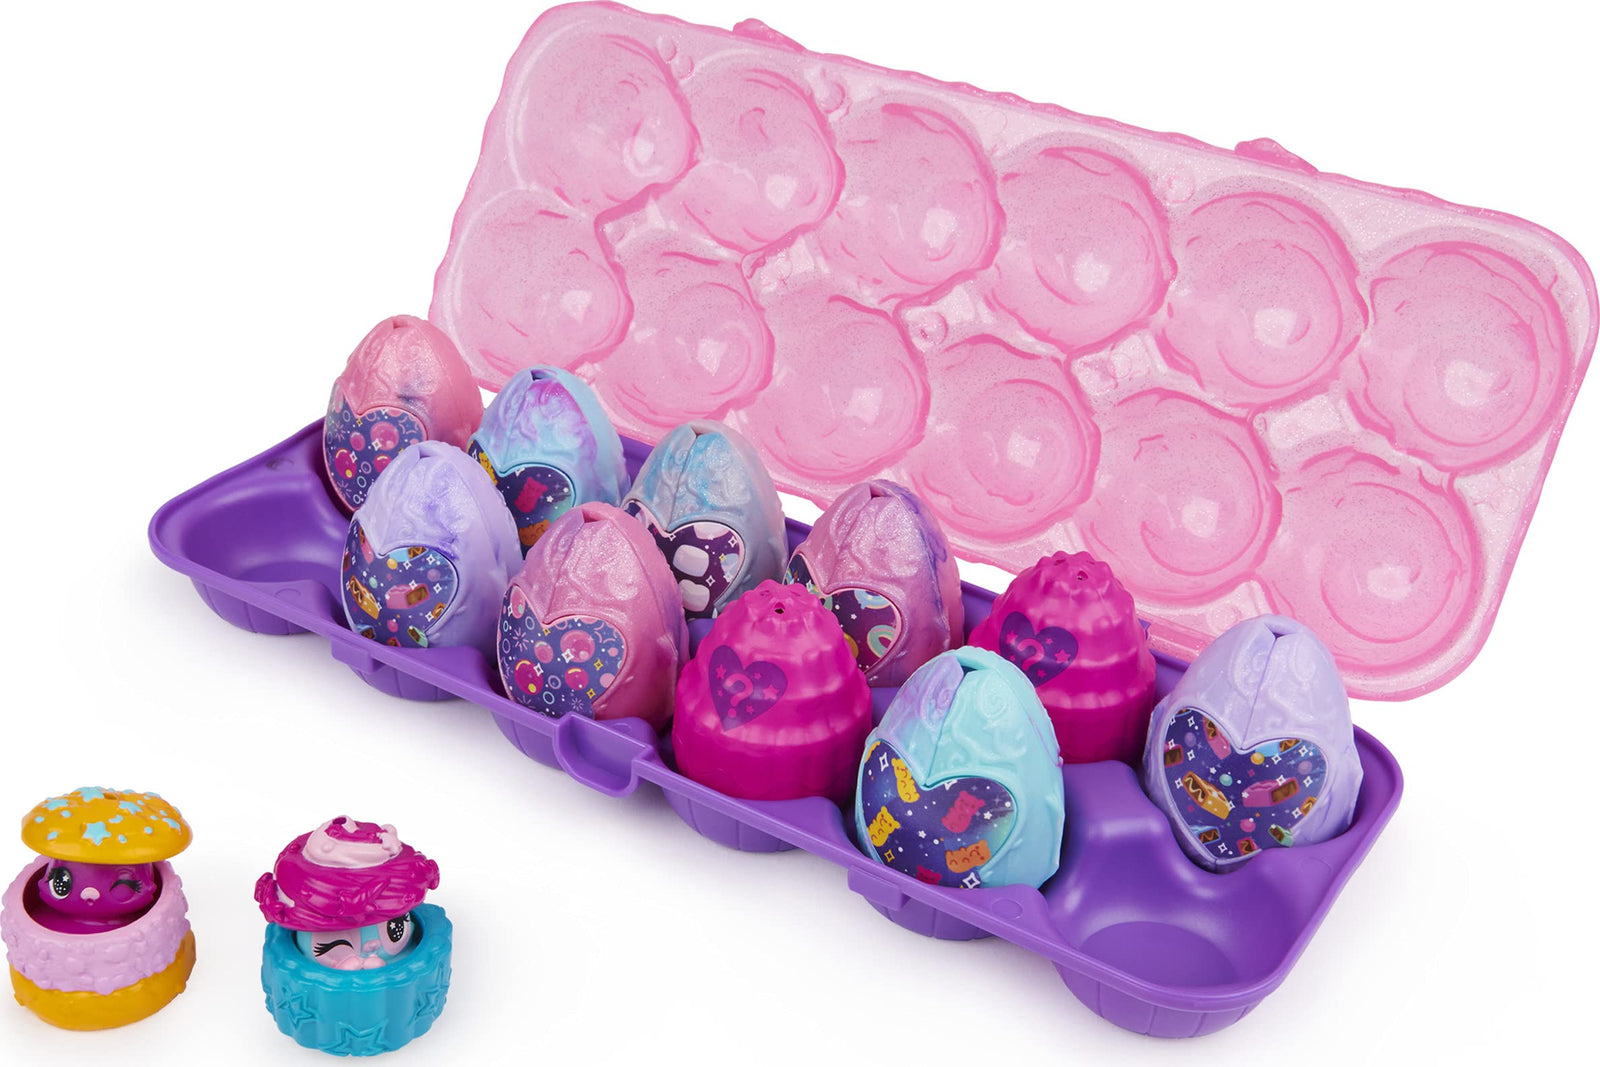 Hatchimals CollEGGtibles, Cosmic Candy Limited Edition Secret Snacks 12-Pack Egg Carton, Girl Toys, Girls Gifts for Ages 5 and up